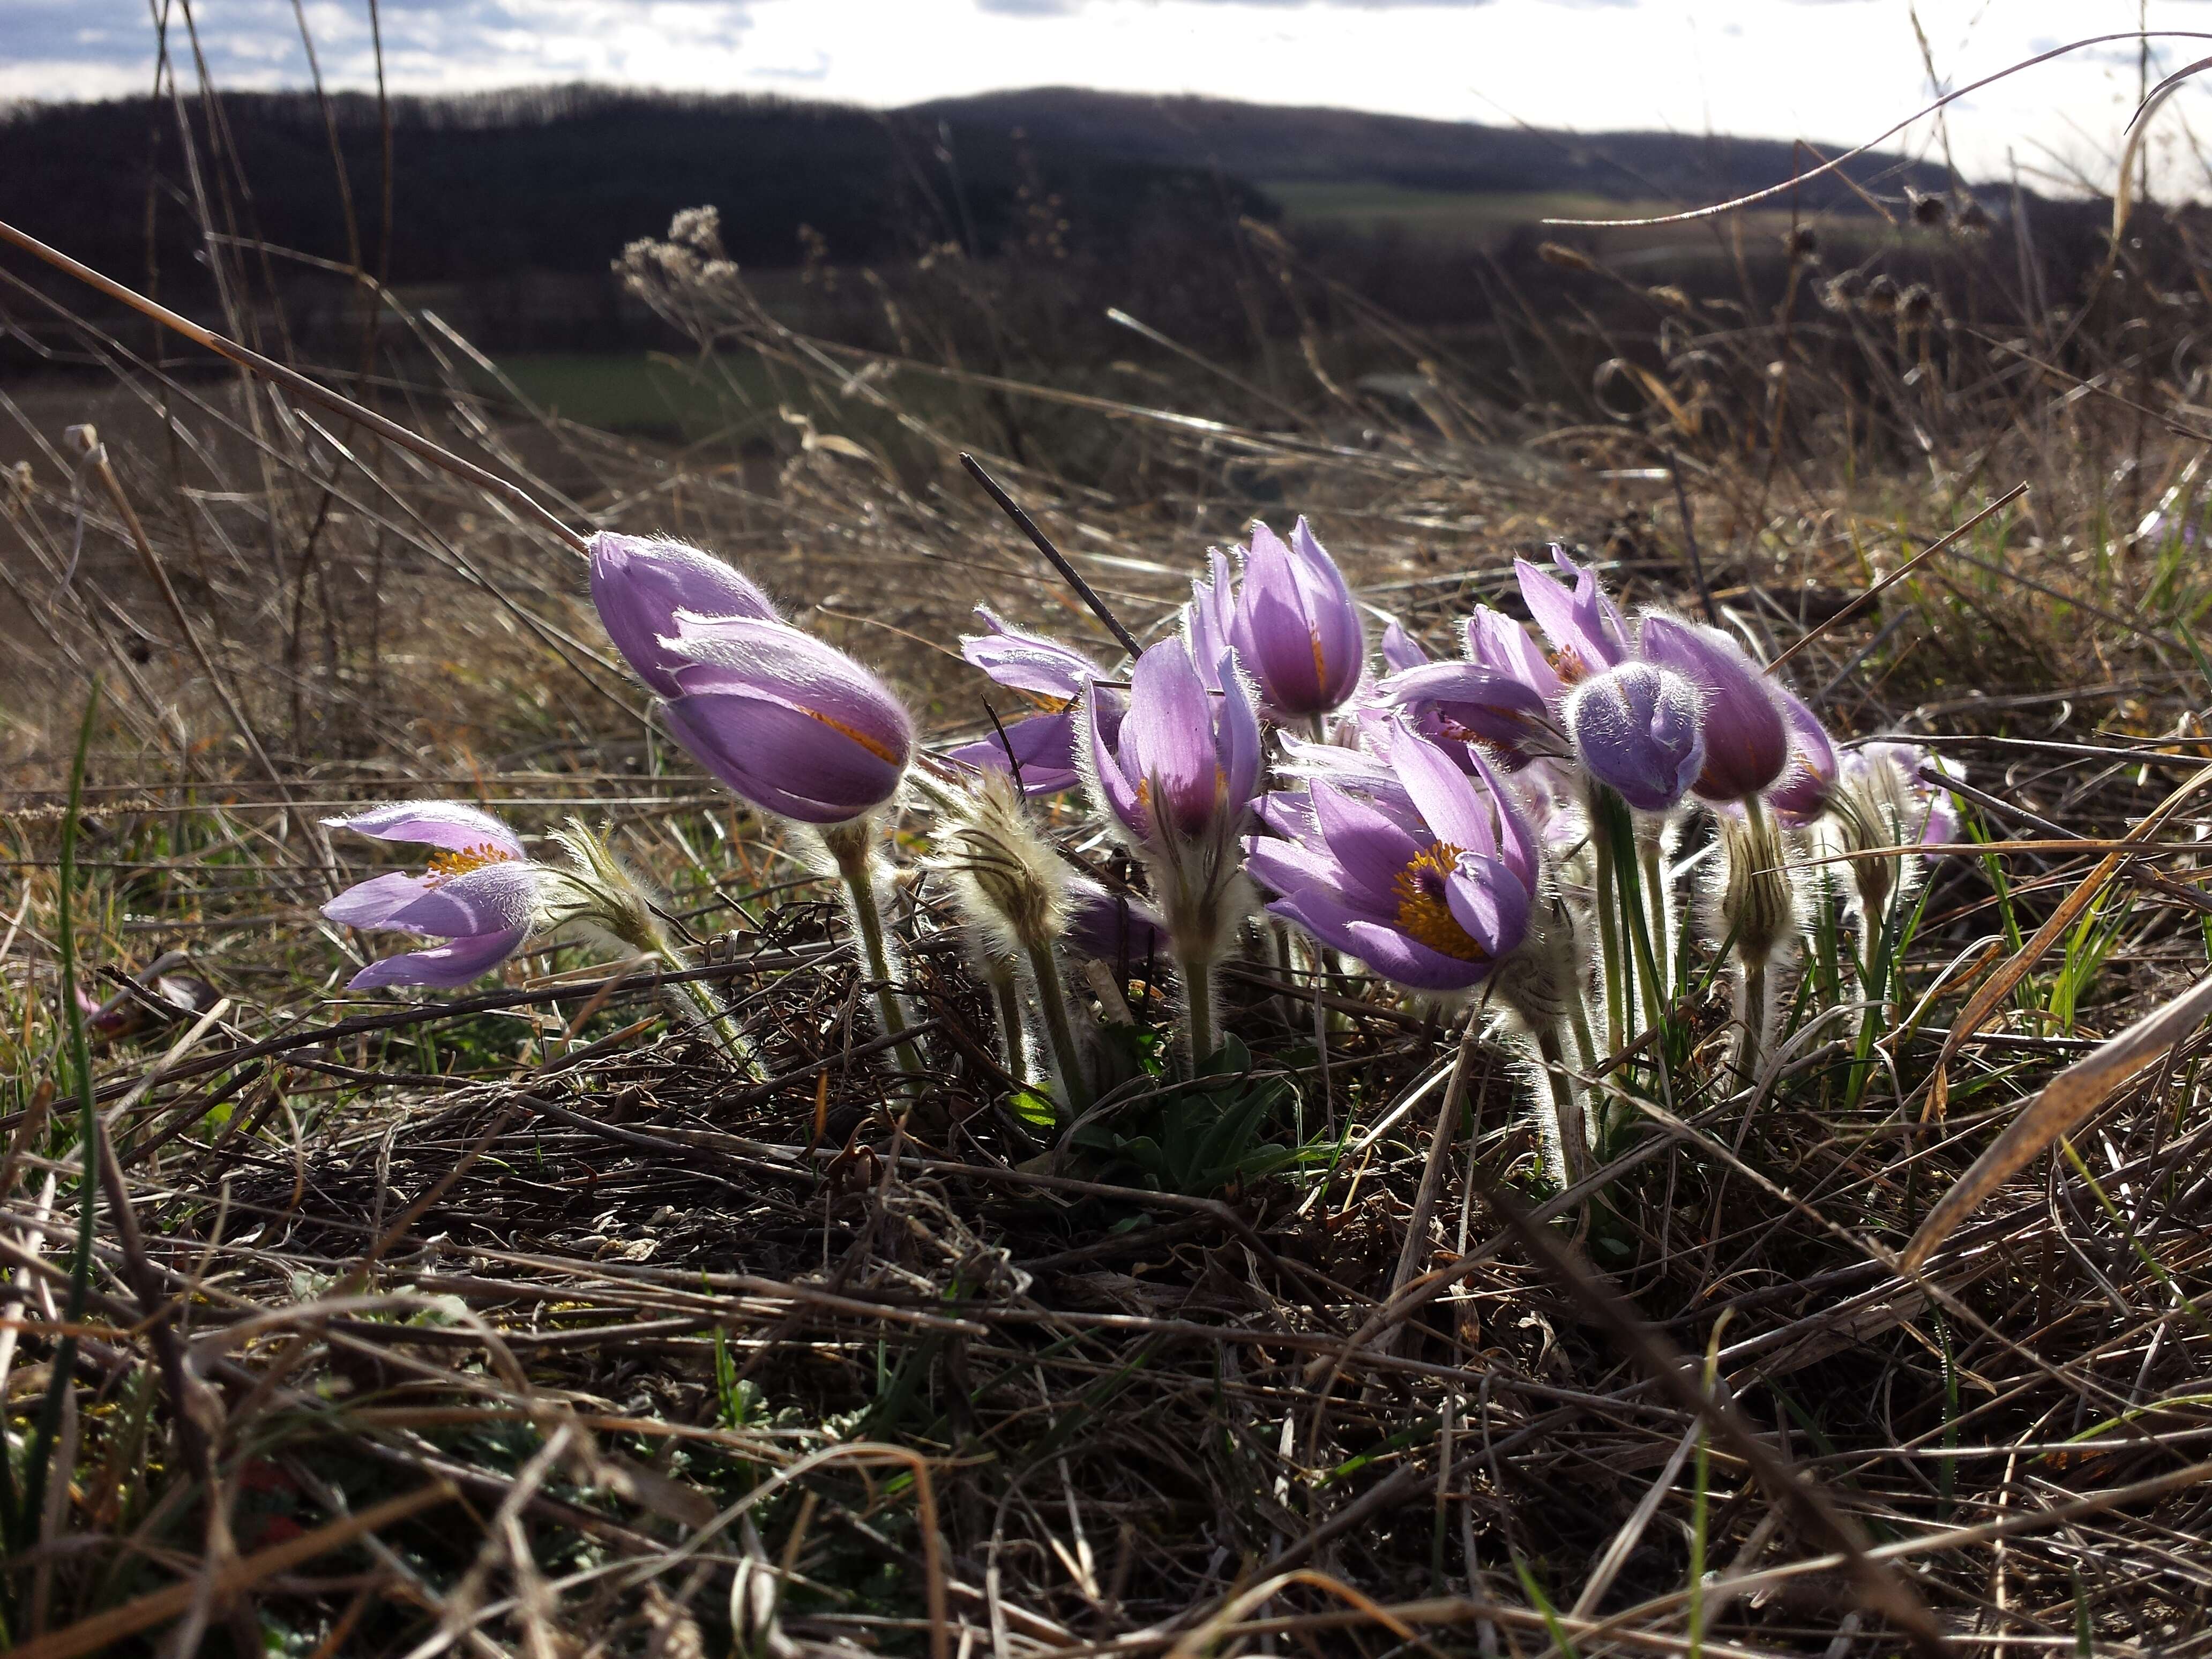 Image of Greater Pasque Flower